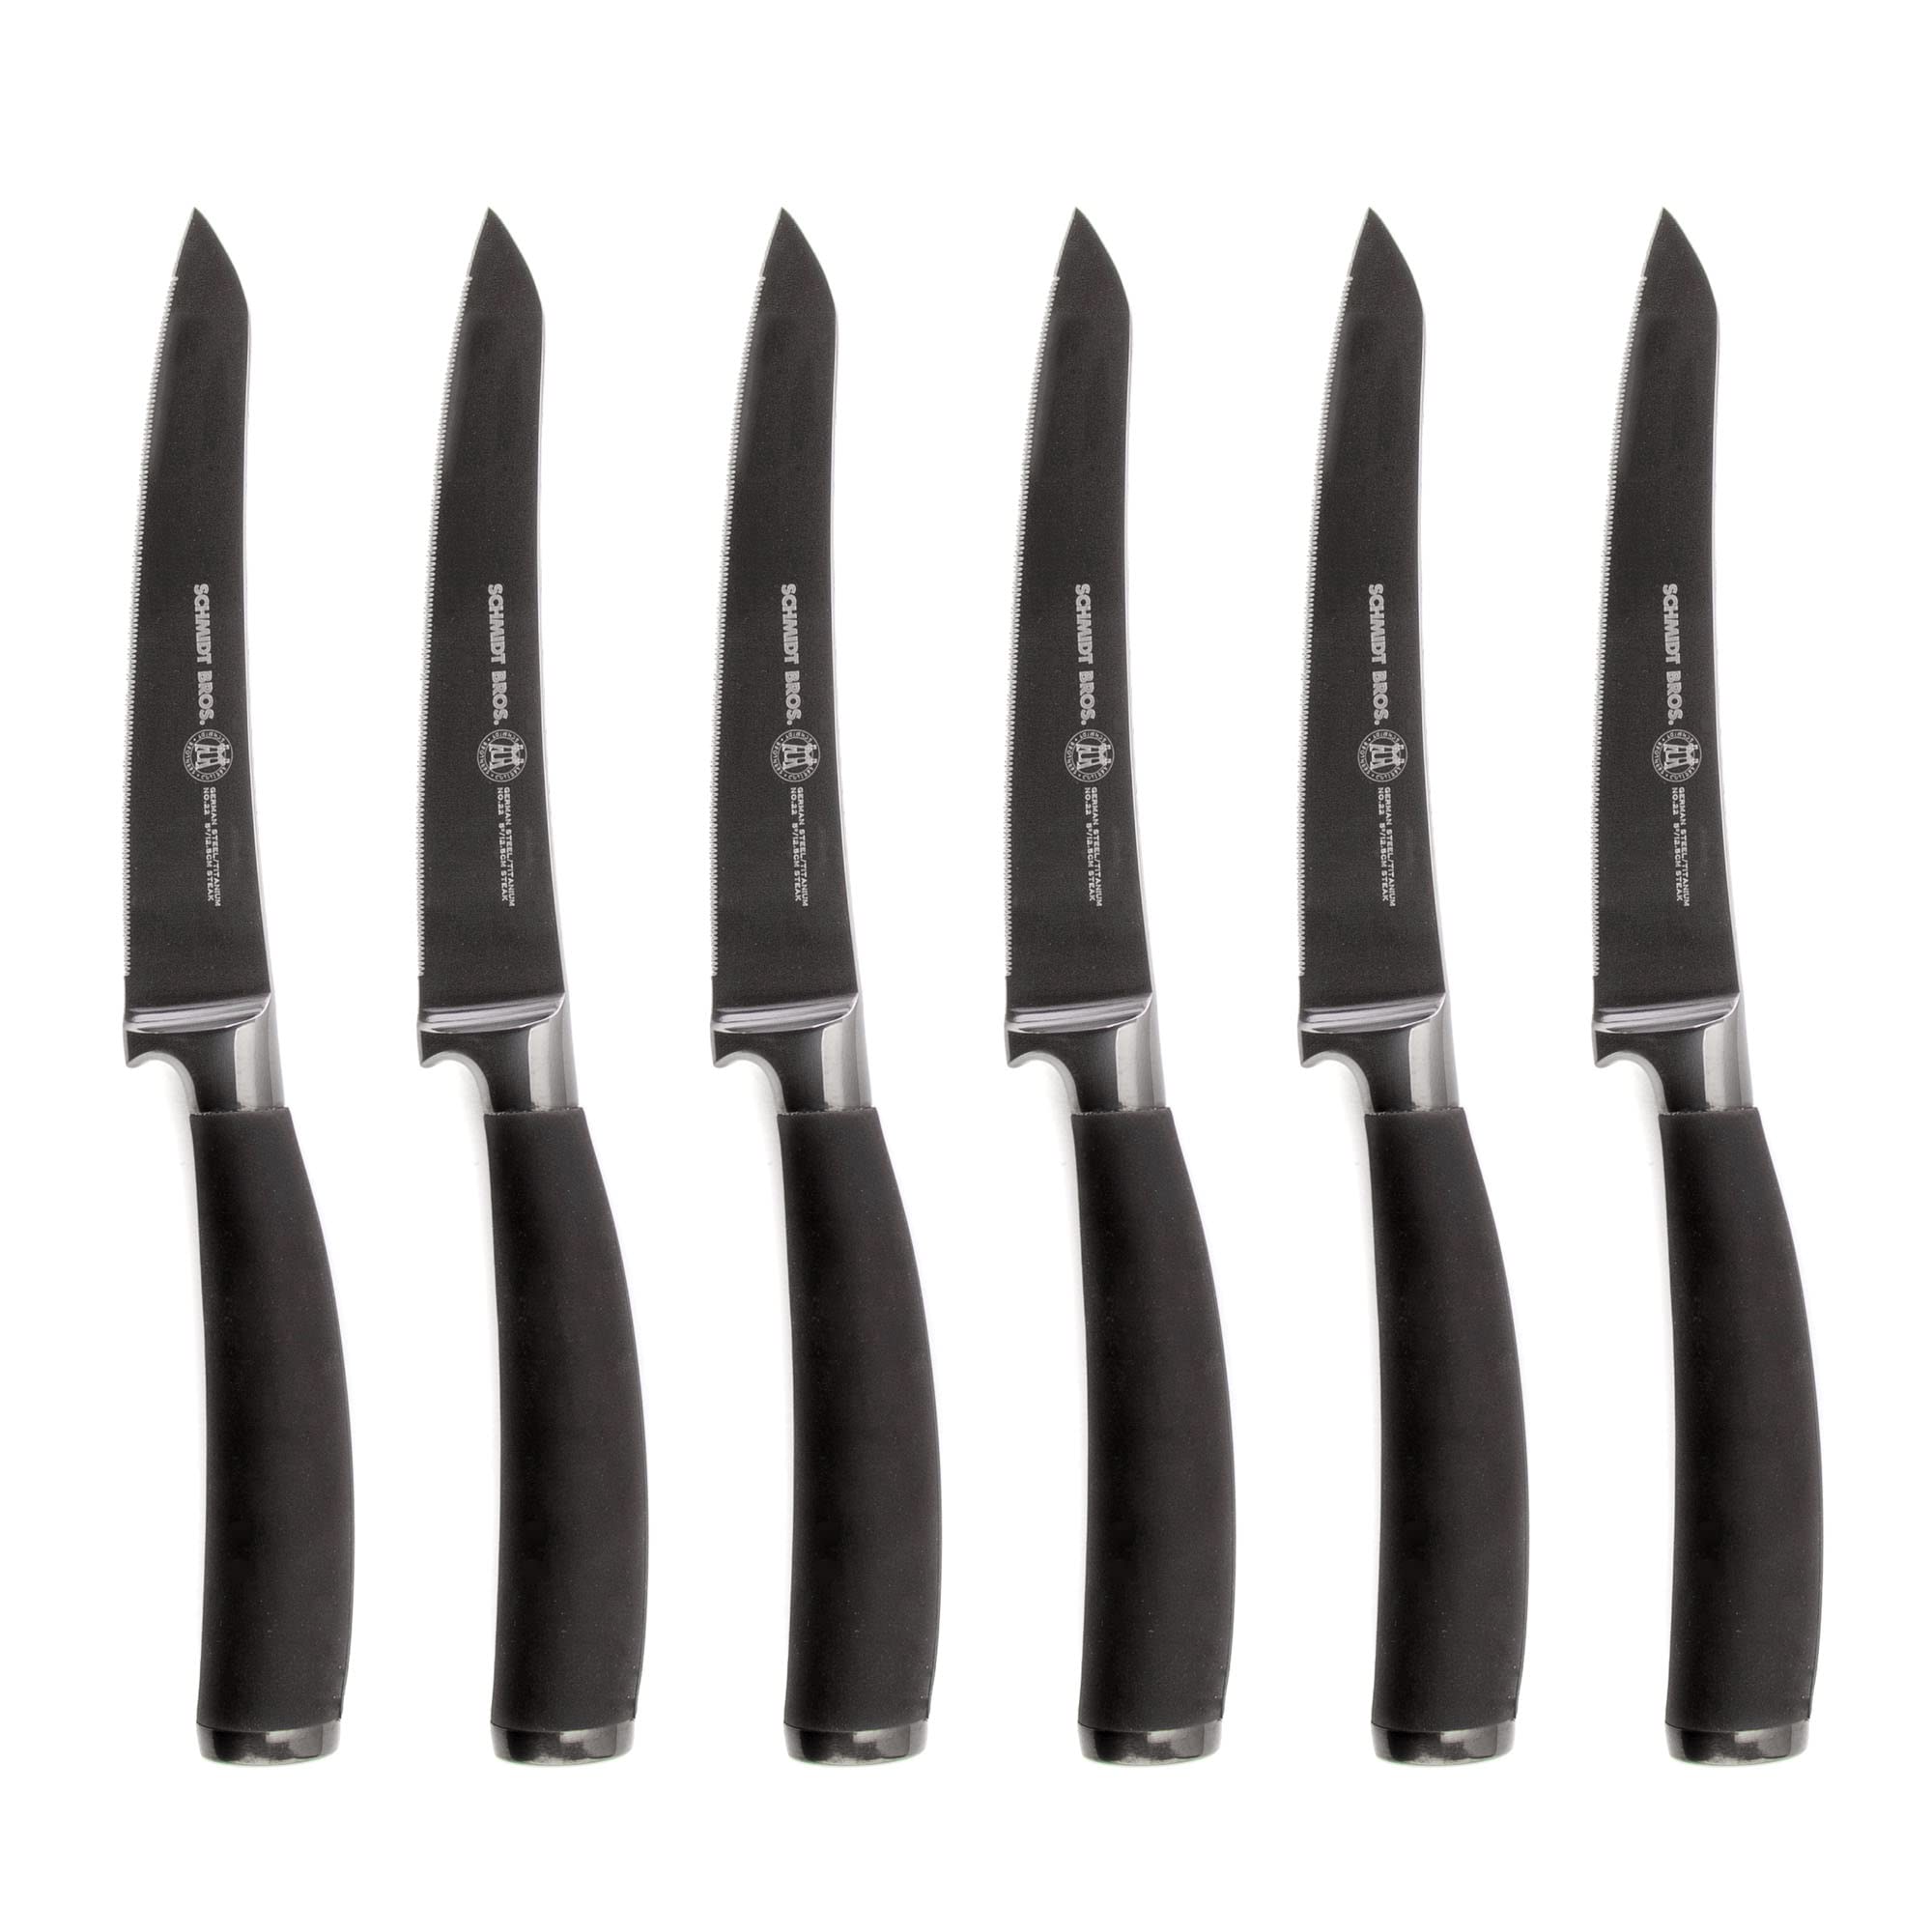 Schmidt Brothers - Titan 22 Series 6-Piece Jumbo Steak Knife Set, High Carbon German Stainless Cutlery in a Wood Gift Box